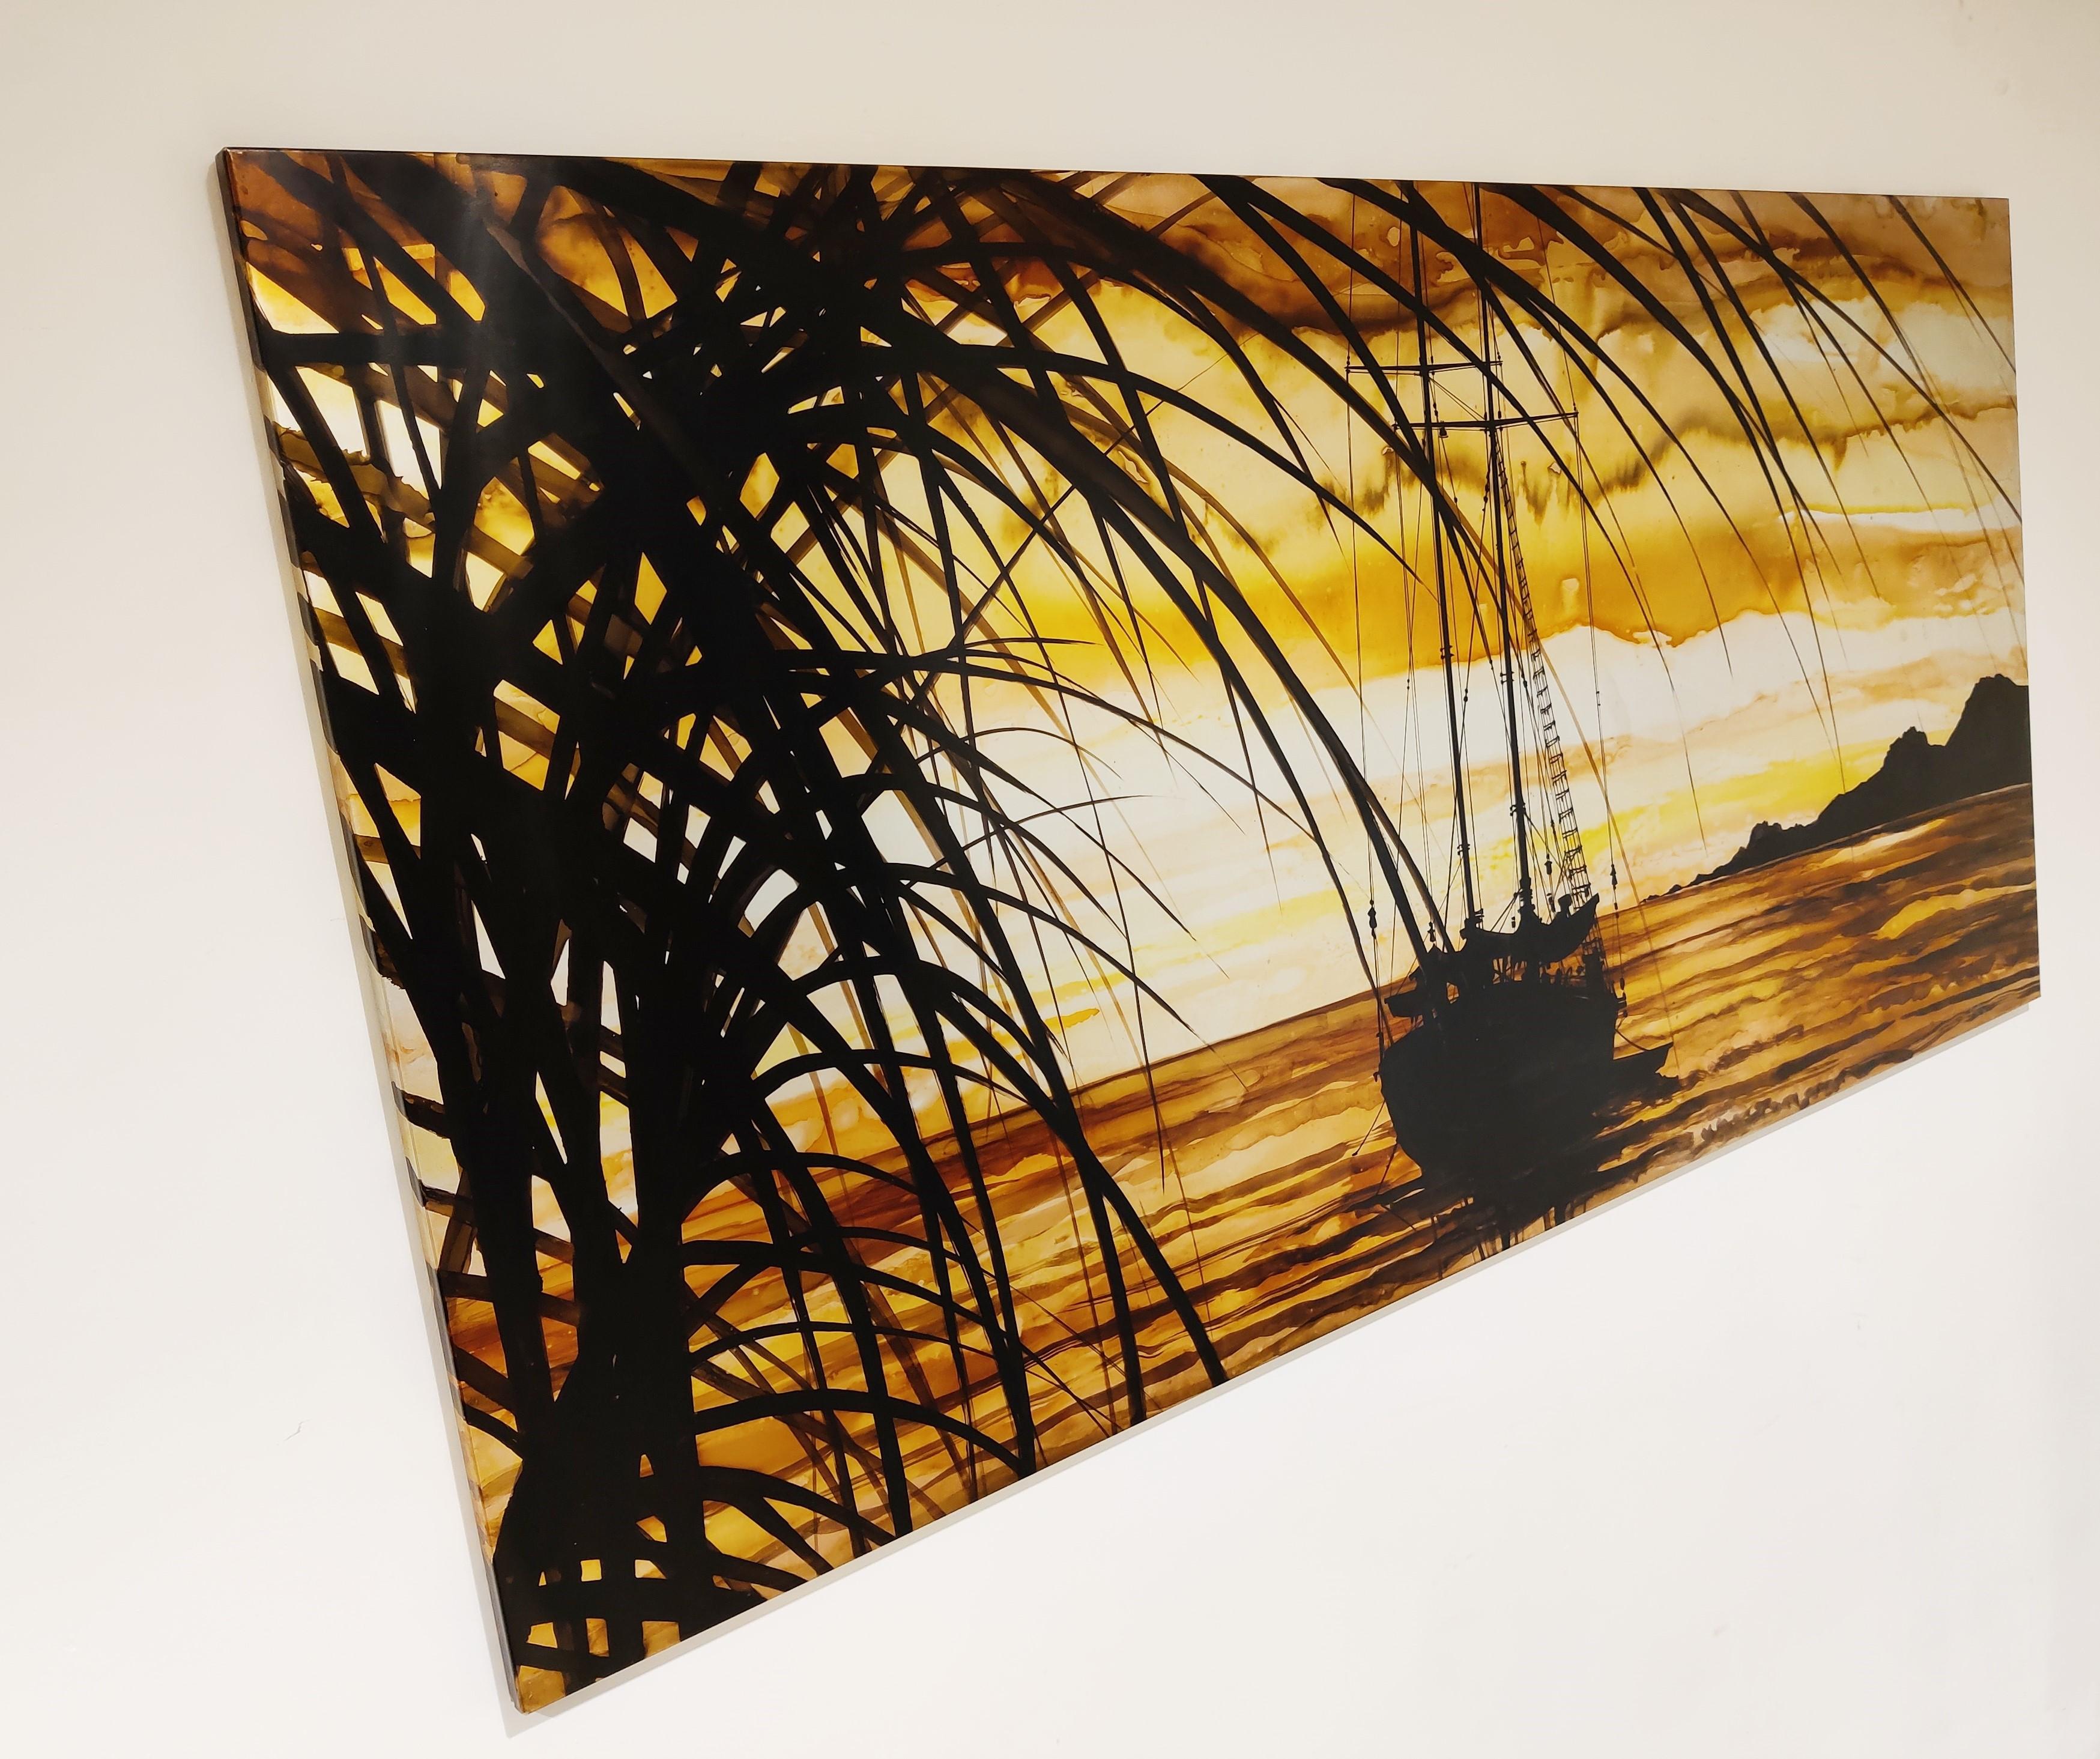 Etched technique - 'Depotter' 19.1.'77

The technique of etching with acid treated metal and a landscape with setting sun and palm trees and a boat, in orange/brown tones.

Measures: Length: 195cm/76.77